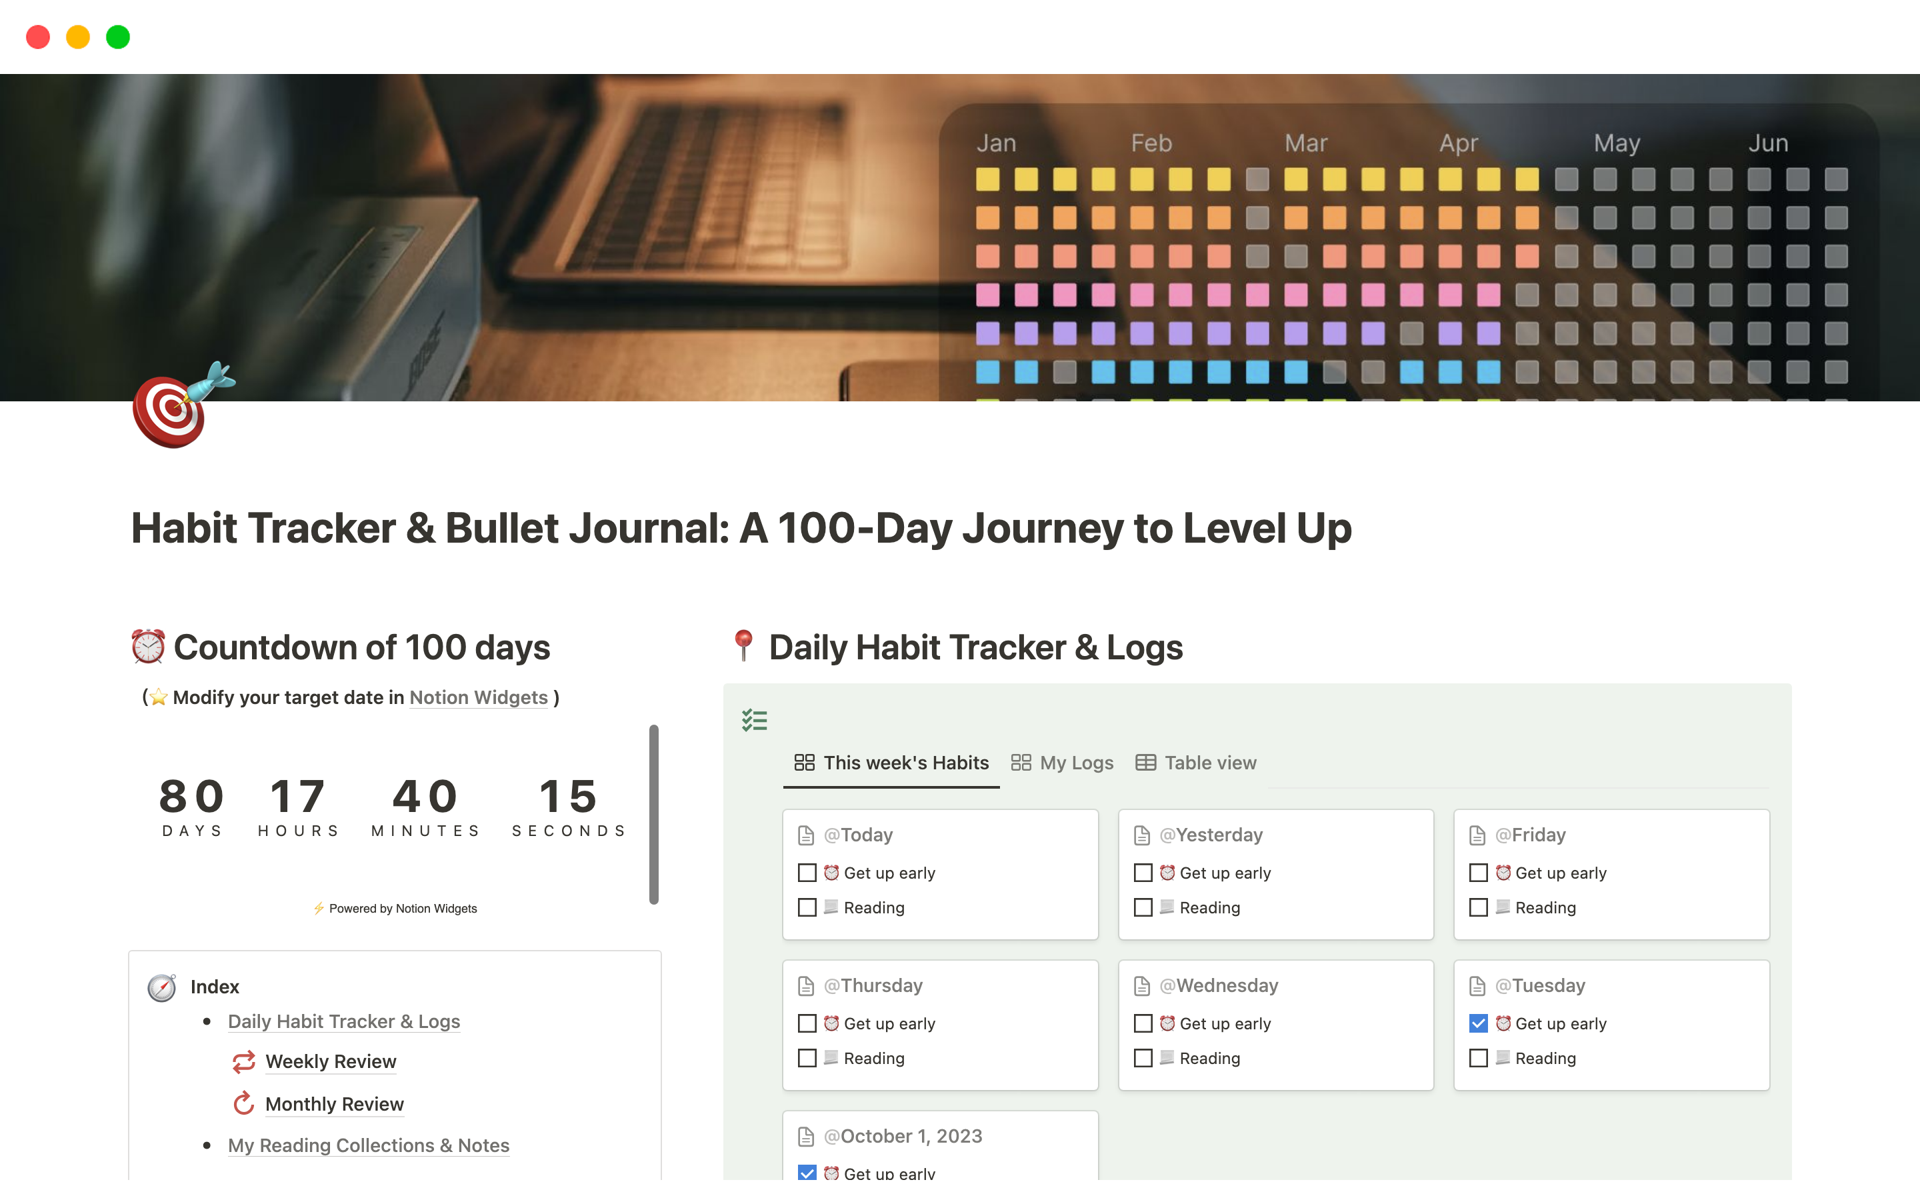 Keep yourself accountable by tracking your habits and recording your bullet journal in 100 days.